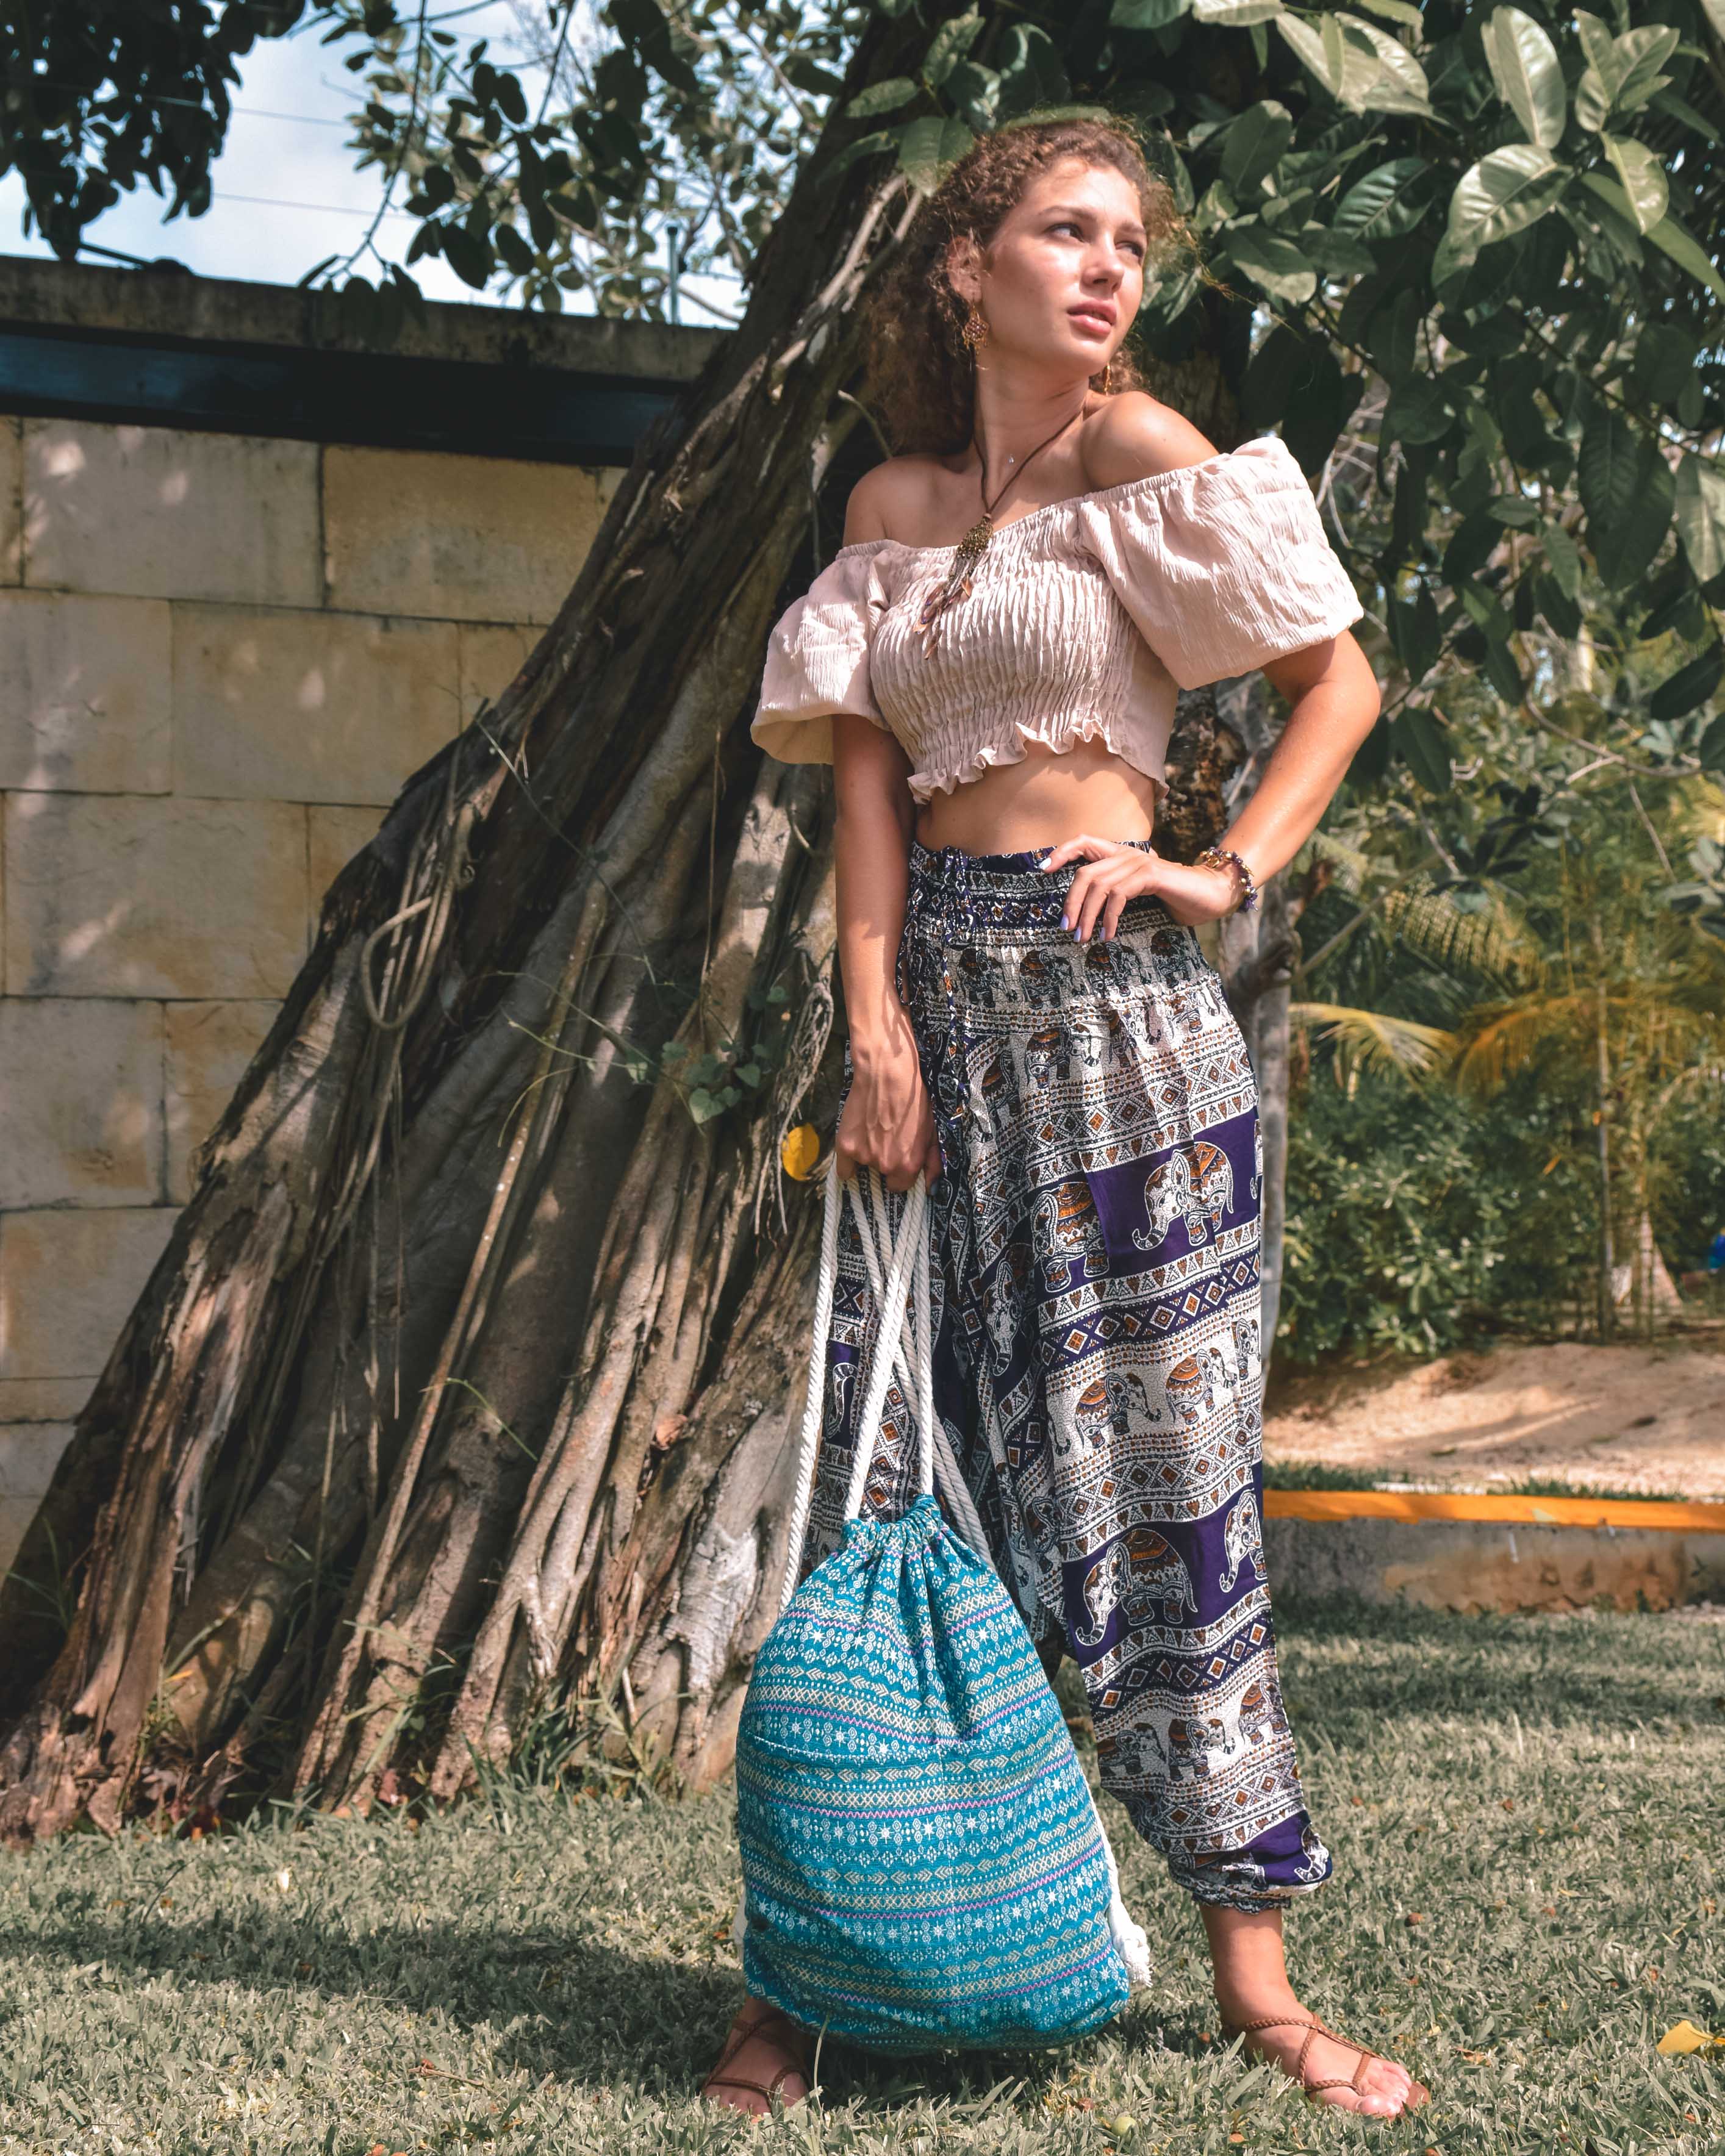 ZAYED DRAWSTRING BAG Elepanta Travel Bags - Buy Today Elephant Pants Jewelry And Bohemian Clothes Handmade In Thailand Help To Save The Elephants FairTrade And Vegan